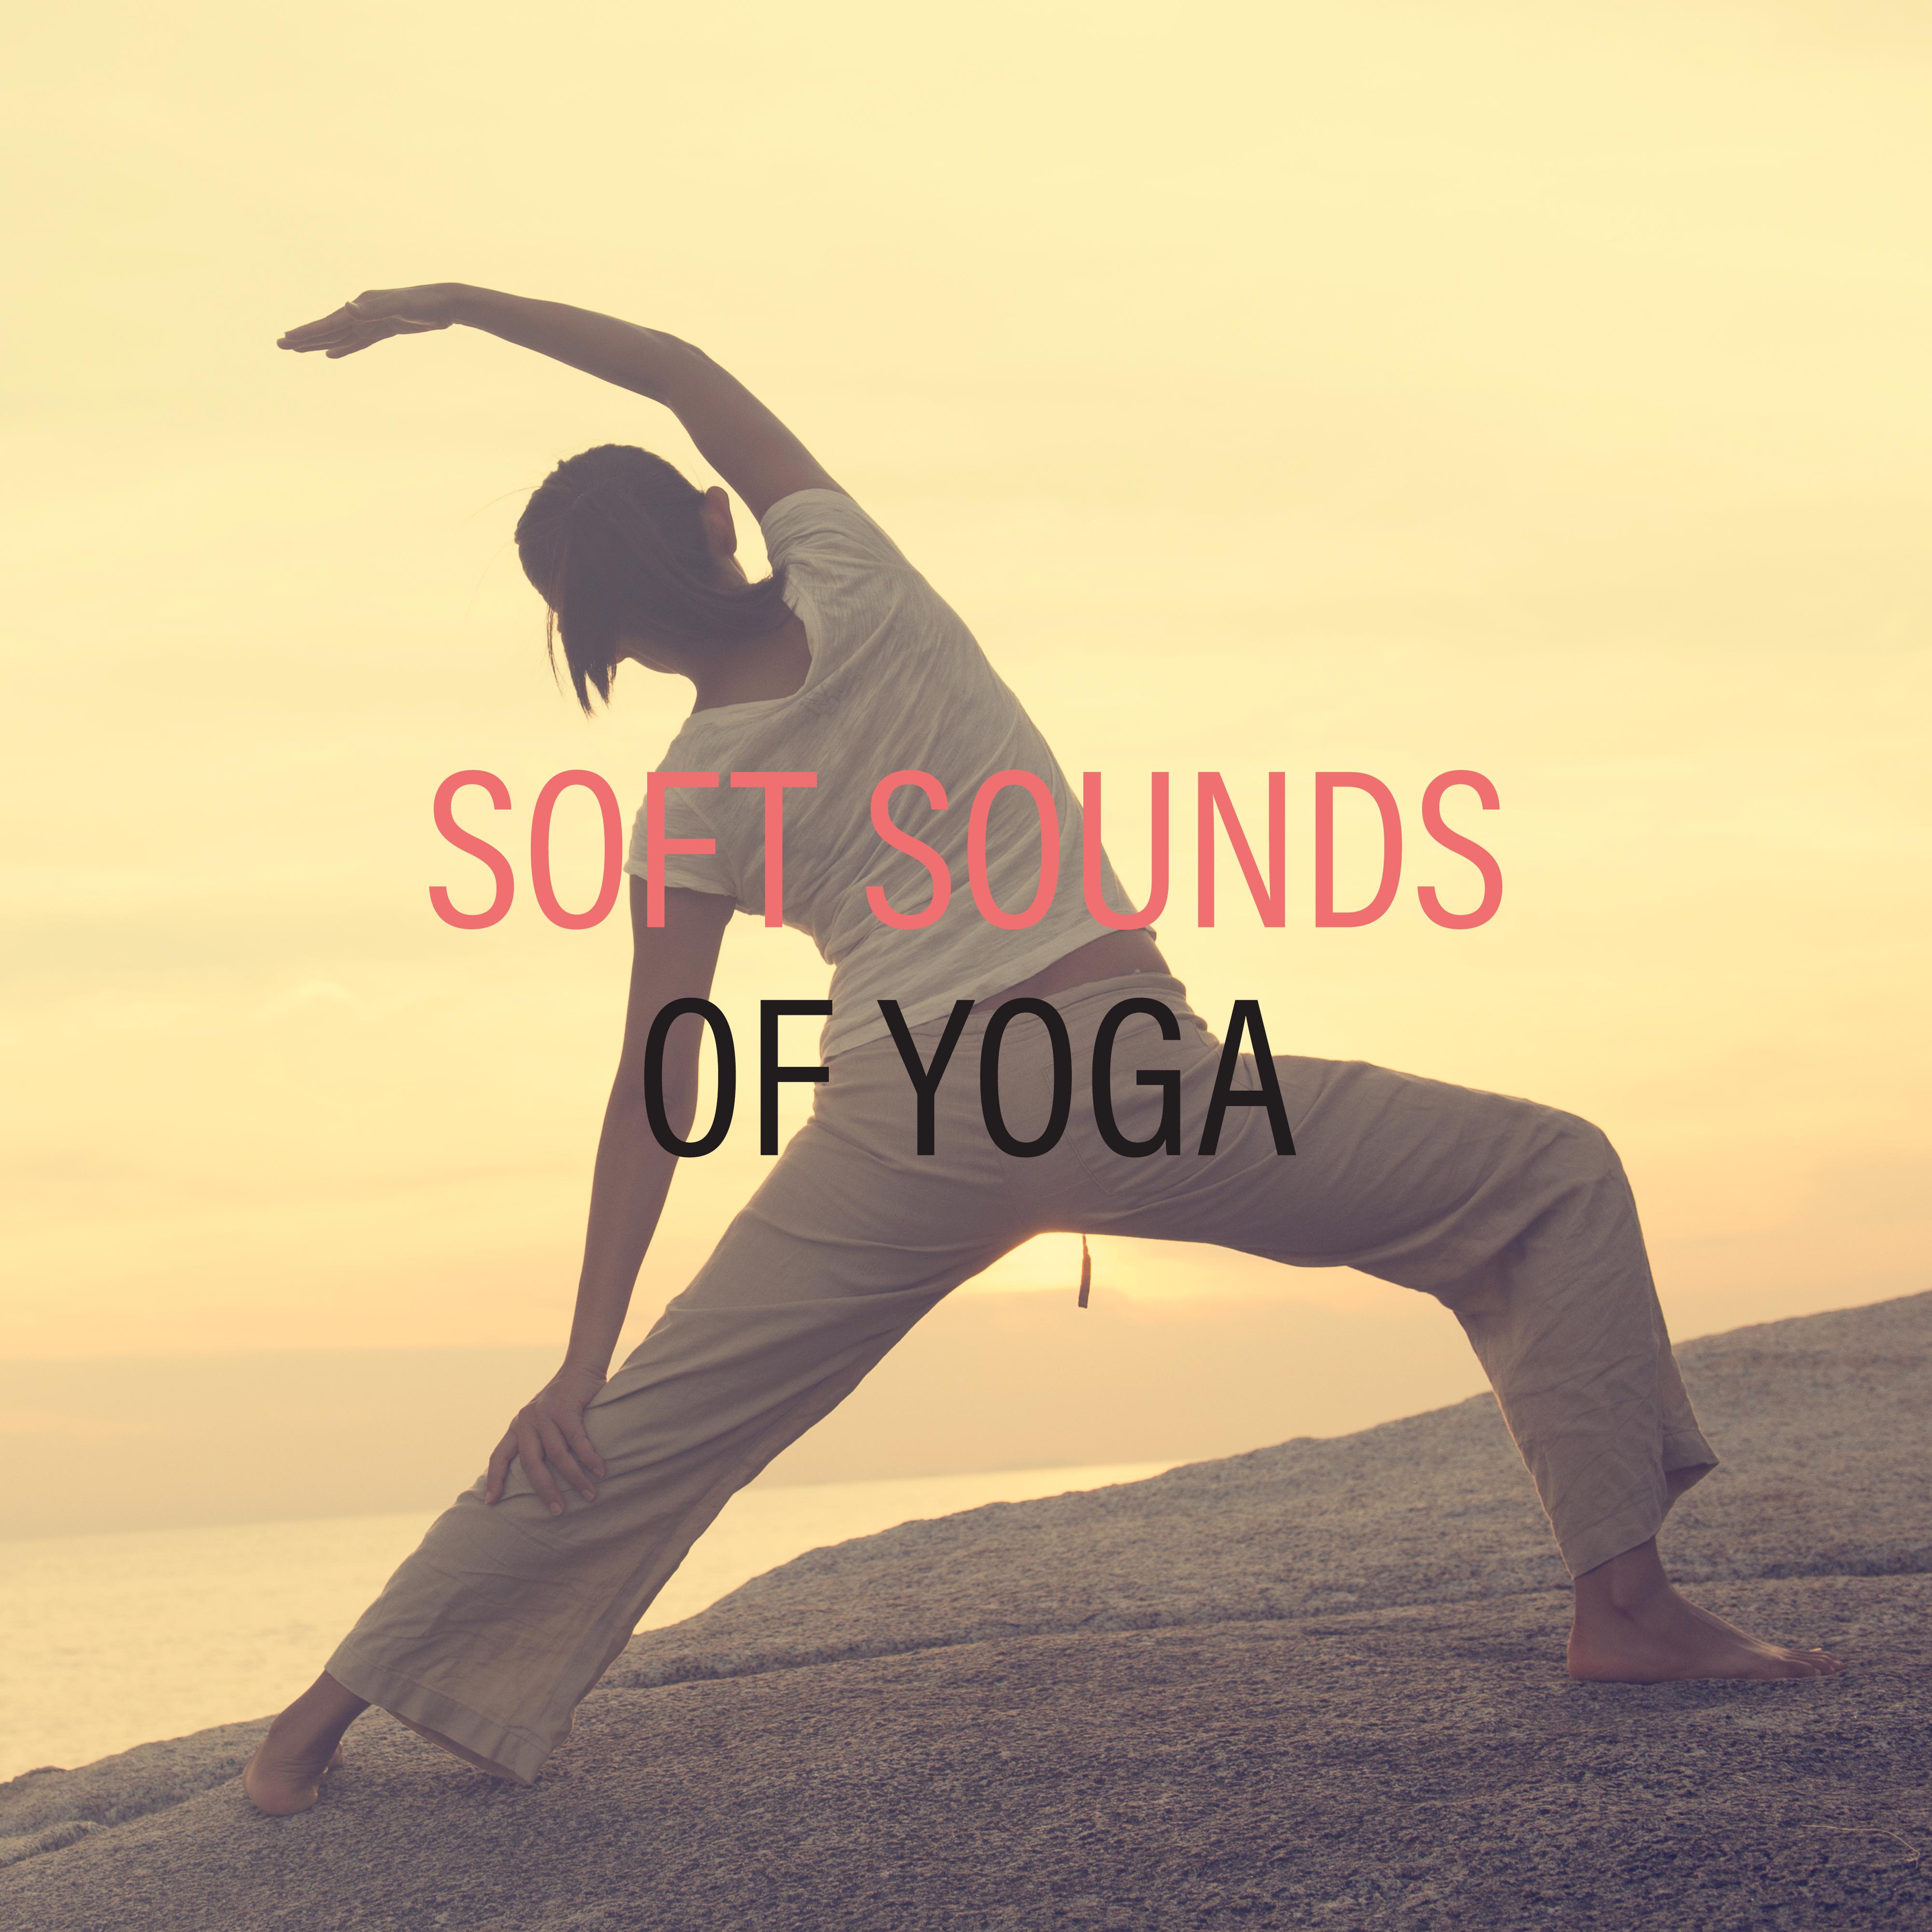 Soft Sounds of Yoga: 15 New Age Songs for Perfect Meditation & Relaxation Experience, Mindfulness Healing Sounds, New 2019 Music